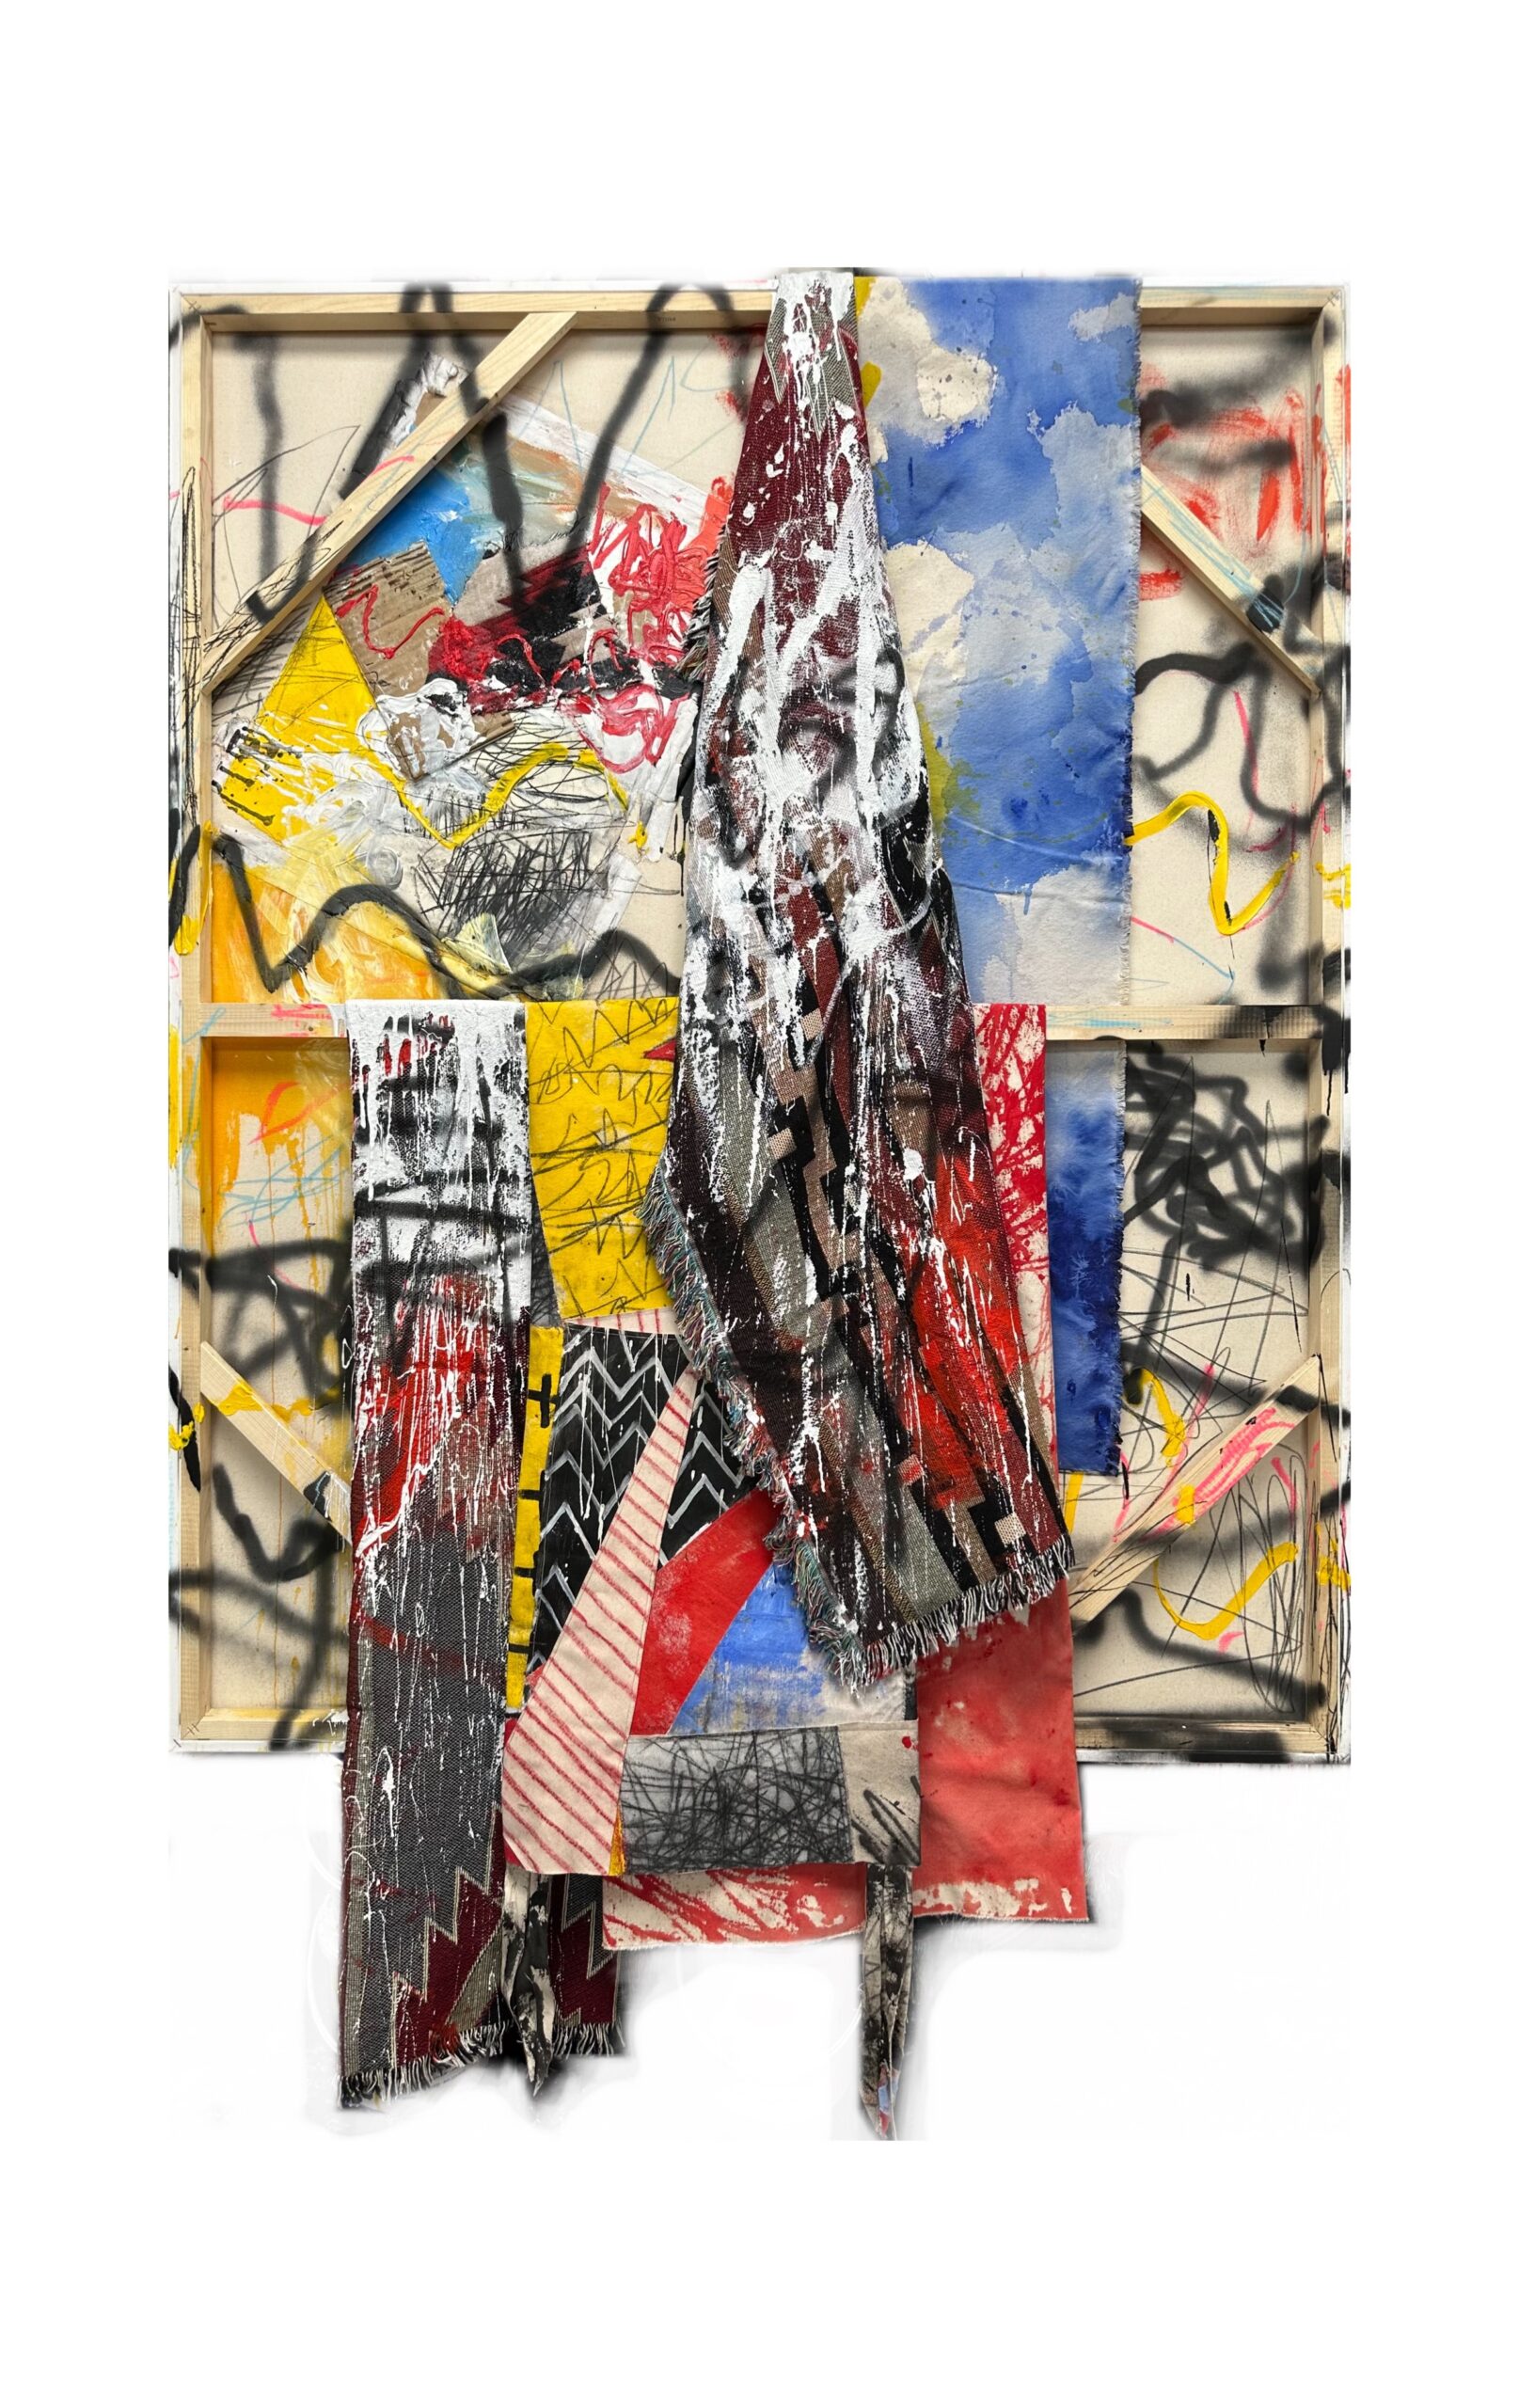 
							

									Patrick Dean Hubbell									Despite It All, We Used What We Had To Make It To A New Day, You Embraced Us 2023									Oil, Acrylic, Enamel, Synthetic Polymer, Spray Paint, OIl Stick, Charcoal, Oil Pastel, Paper, Cardboard, Acrylic Dispersion, Sewing on Canvas,  Synthetic Mass Manufactured Textile on Canvas<br />
76 x 48 inches									


							